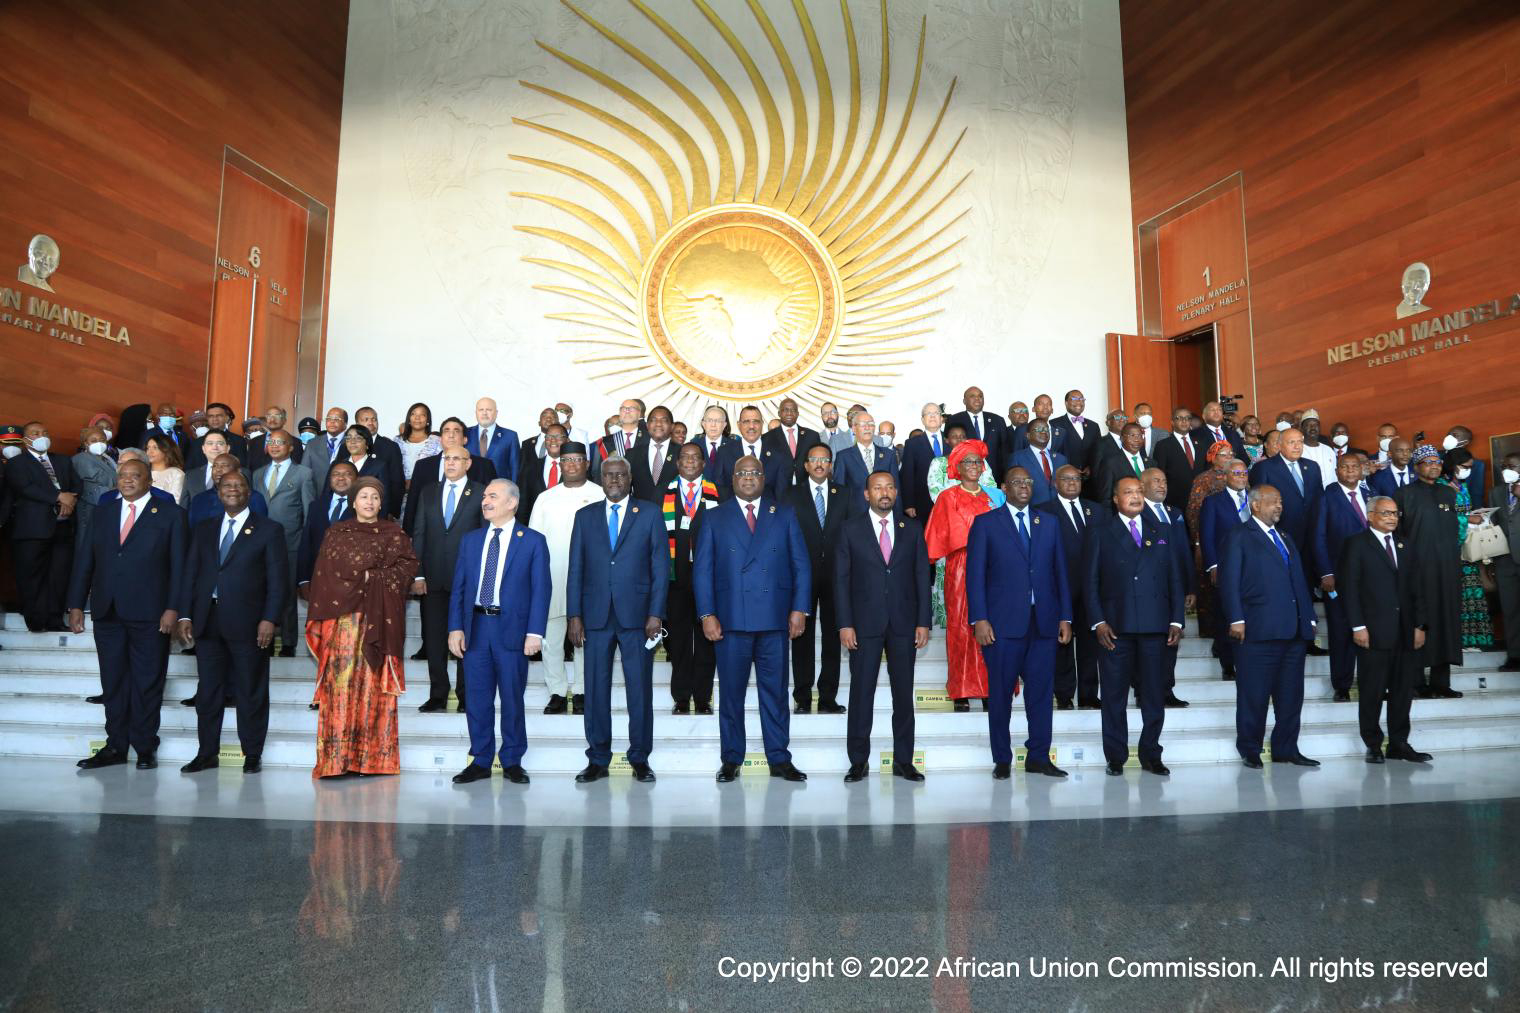 Israeli Diplomat Kicked Out of African Union Summit | The African Exponent.